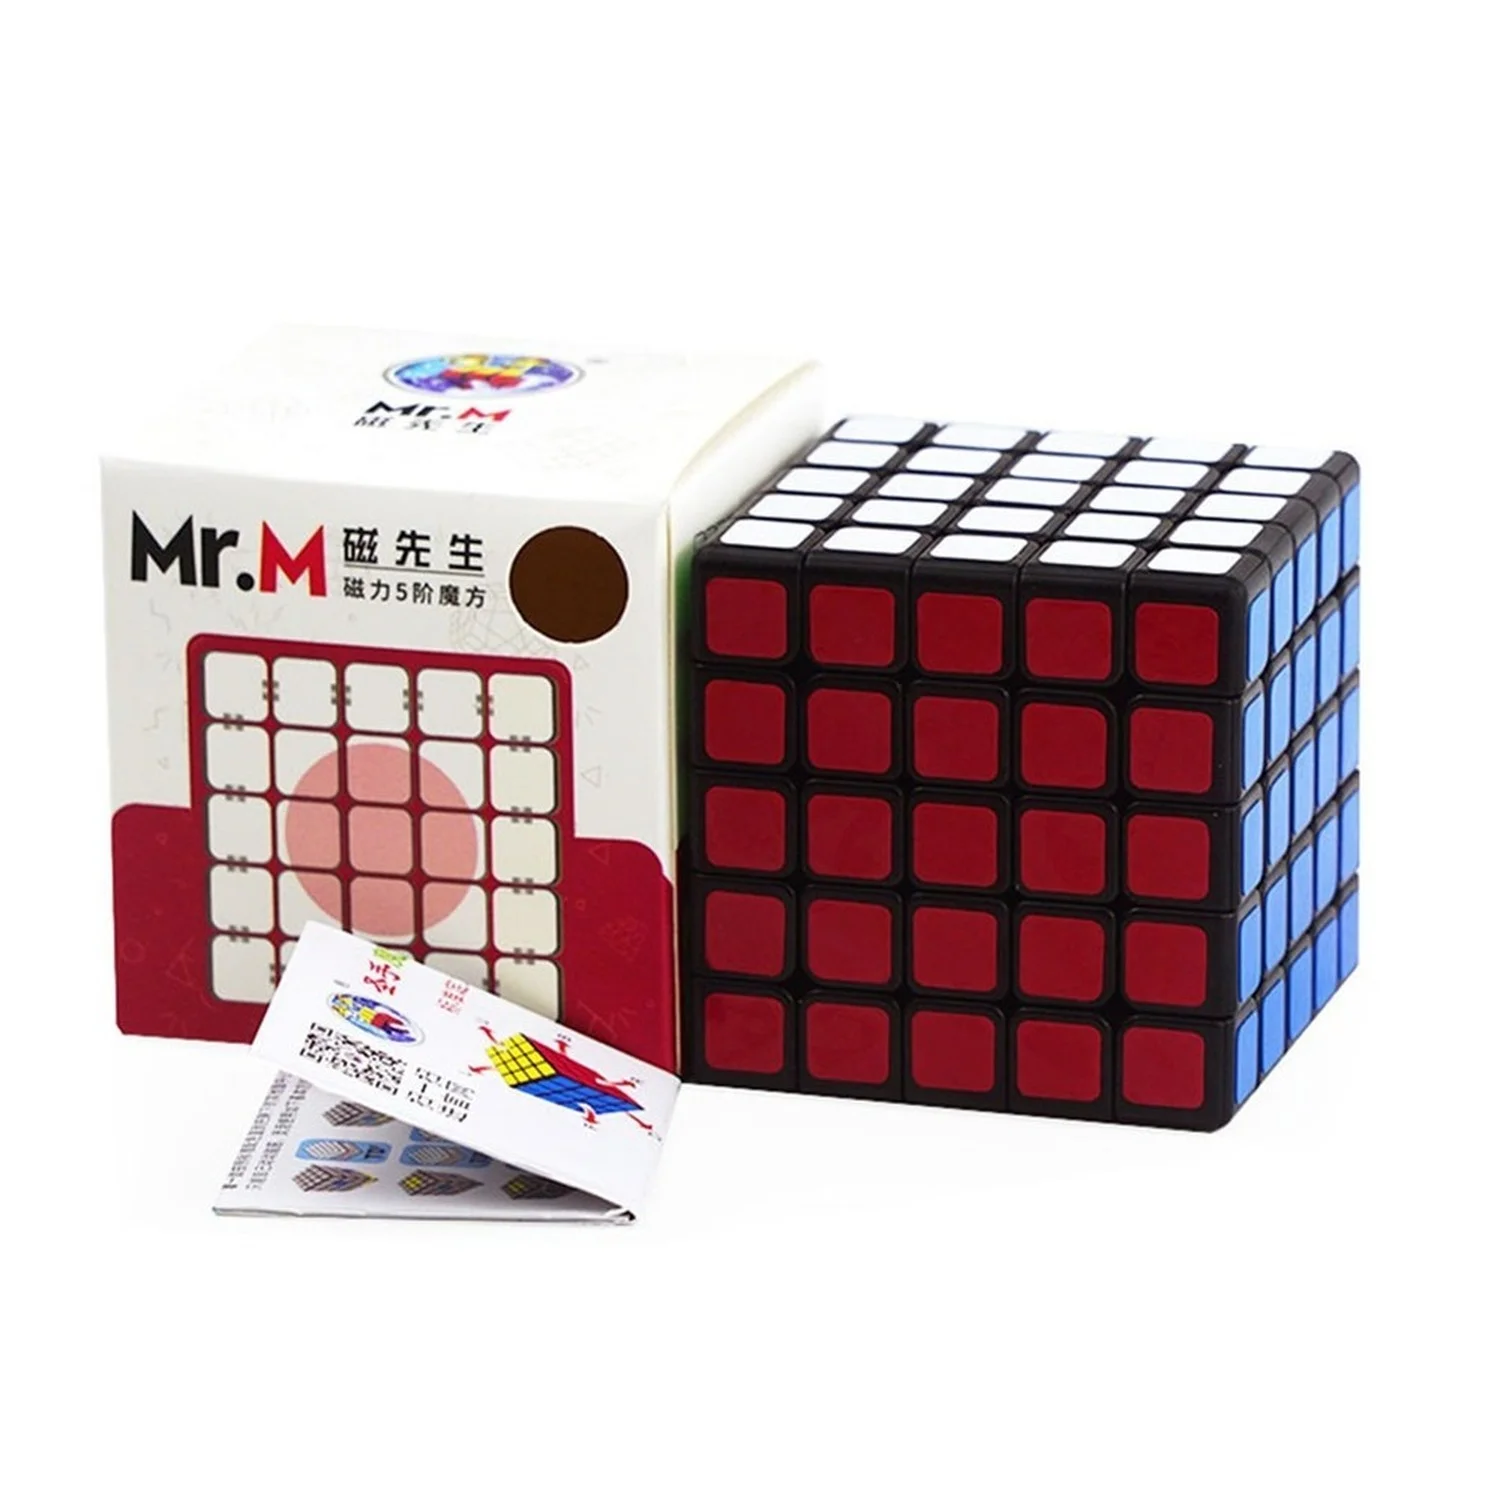 

Sengso Mr.M 5x5x5 Magnetic Cube Shengshou 5x5 Speed Magic Puzzle Cubo Magico Magnet Games Educational Cube Stress Reliever Toys